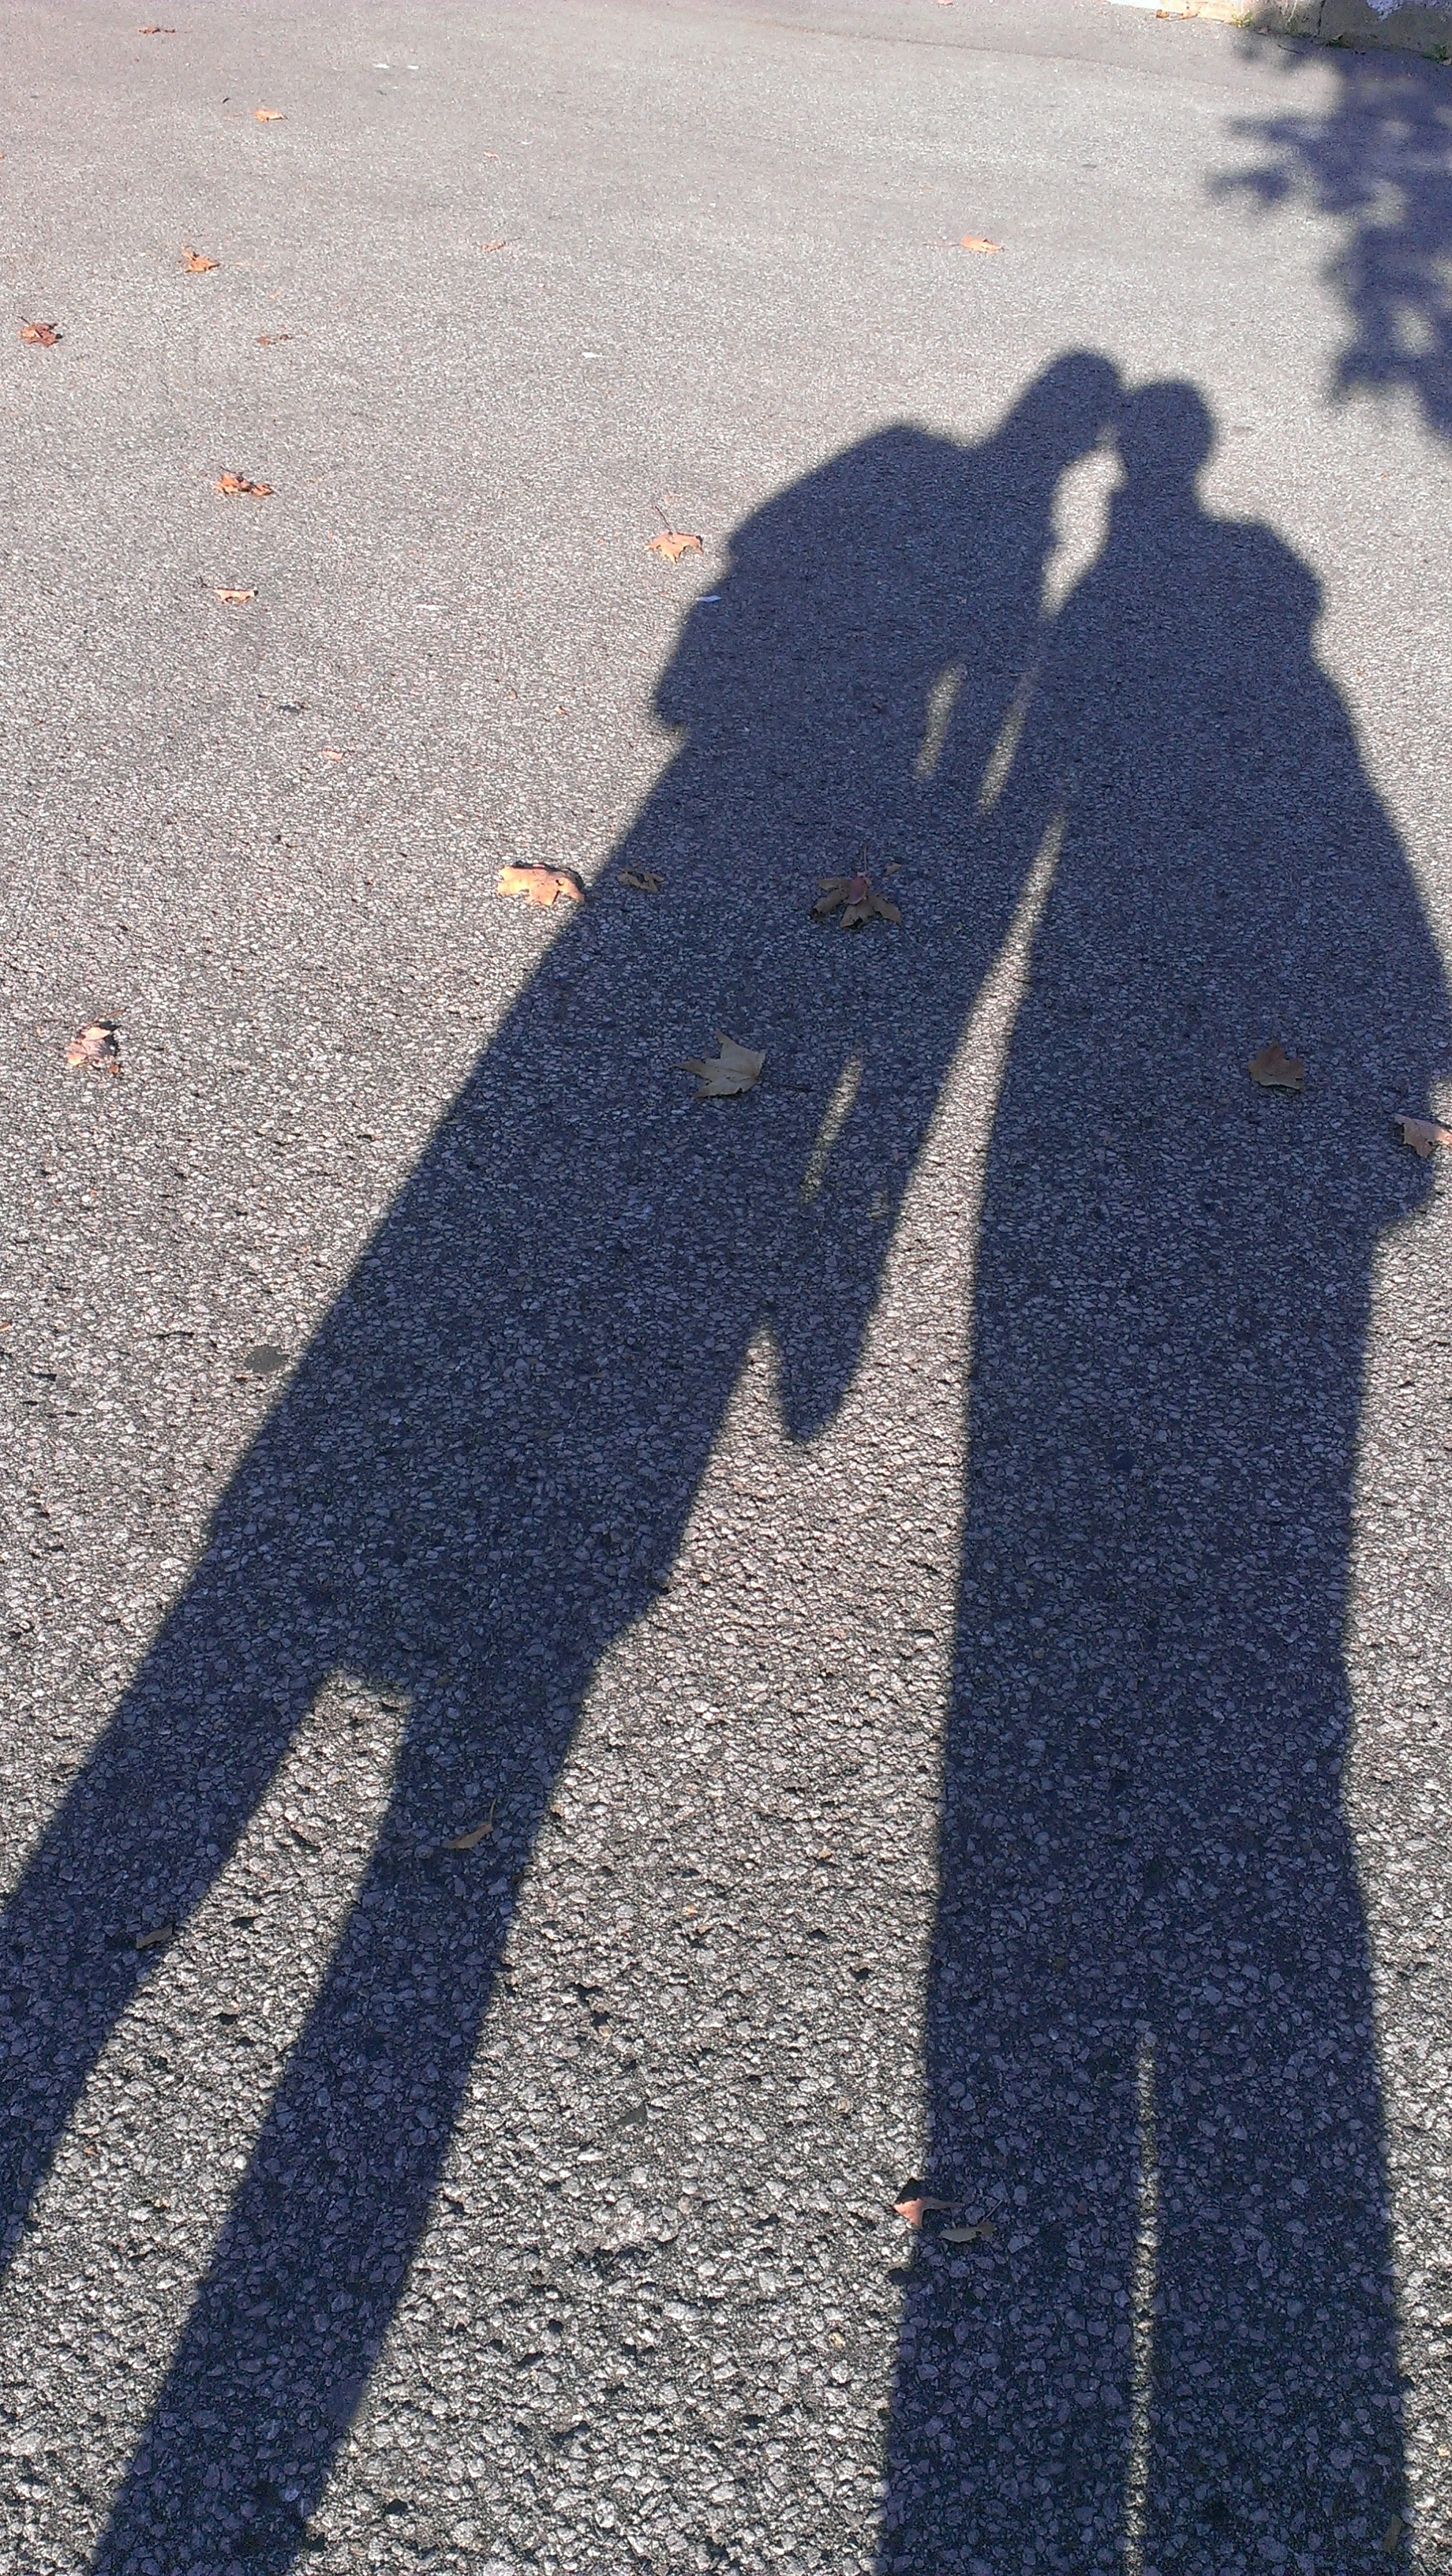 shadow of 2 person on asphalt road during daytime